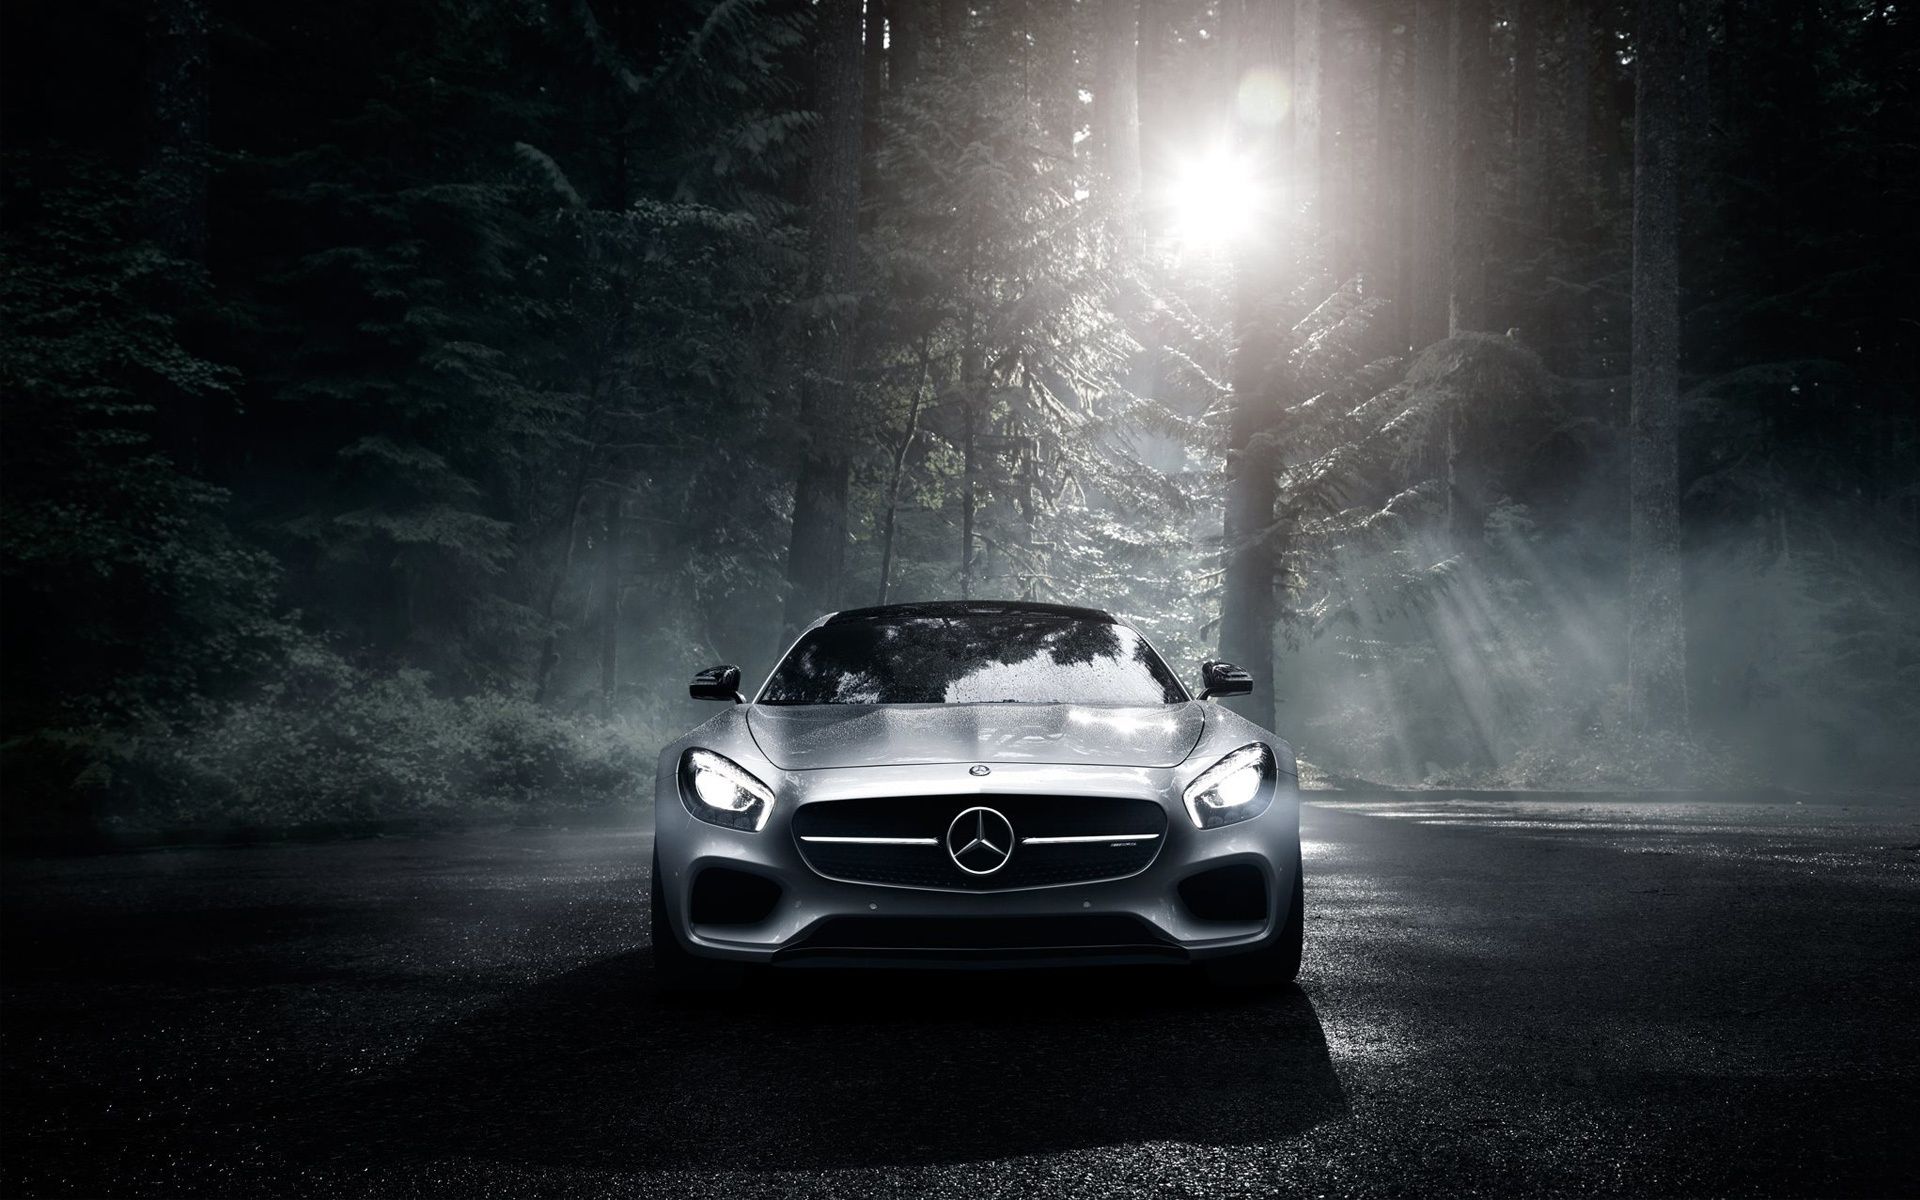 Mercedes Benz Wallpapers - Page 1 - HD Wallpapers